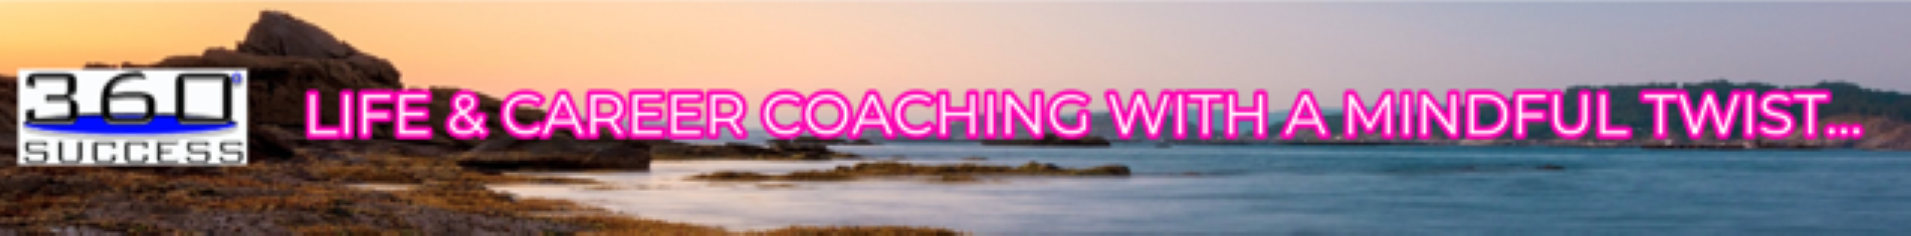 https://voiceamerica.com/shows/4049/be/Career Coaching Mindful Twist TOP.png